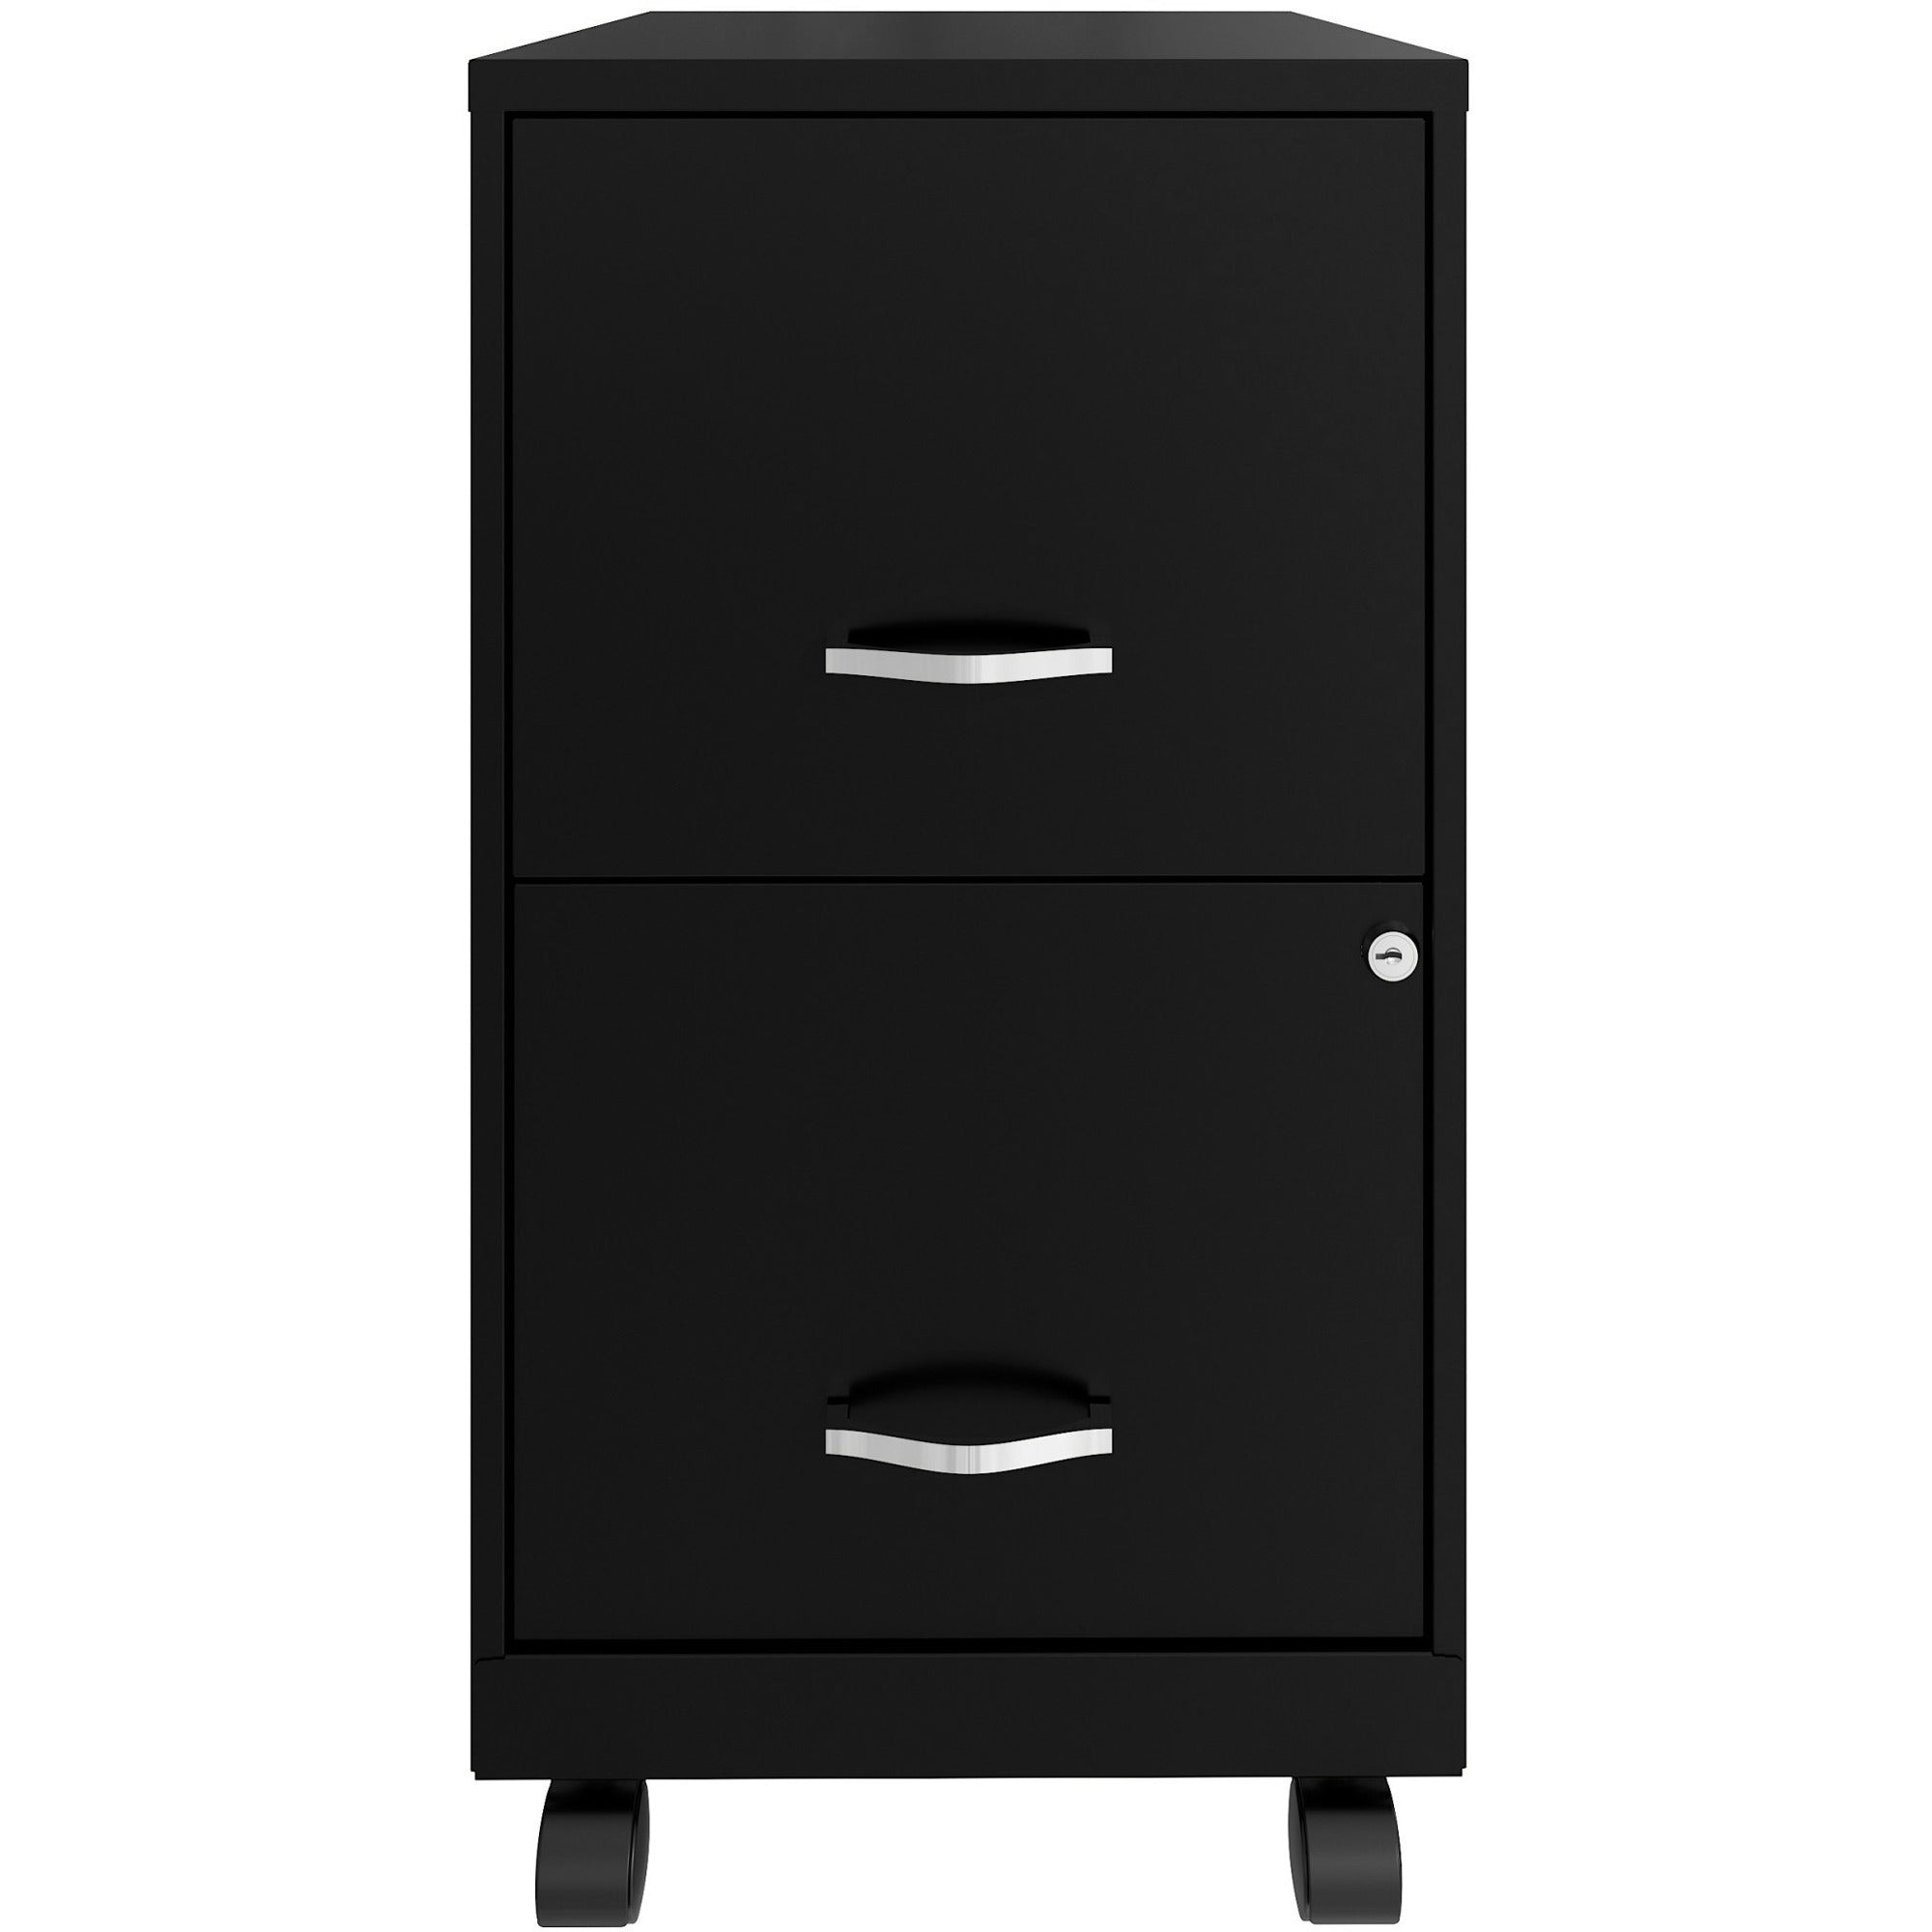 nusparc-mobile-file-cabinet-142-x-18-x-265-for-file-letter-mobility-locking-drawer-glide-suspension-3-4-drawer-extension-cam-lock-nonporous-surface-black-painted-steel-steel-recycled_nprvf218ambk - 2